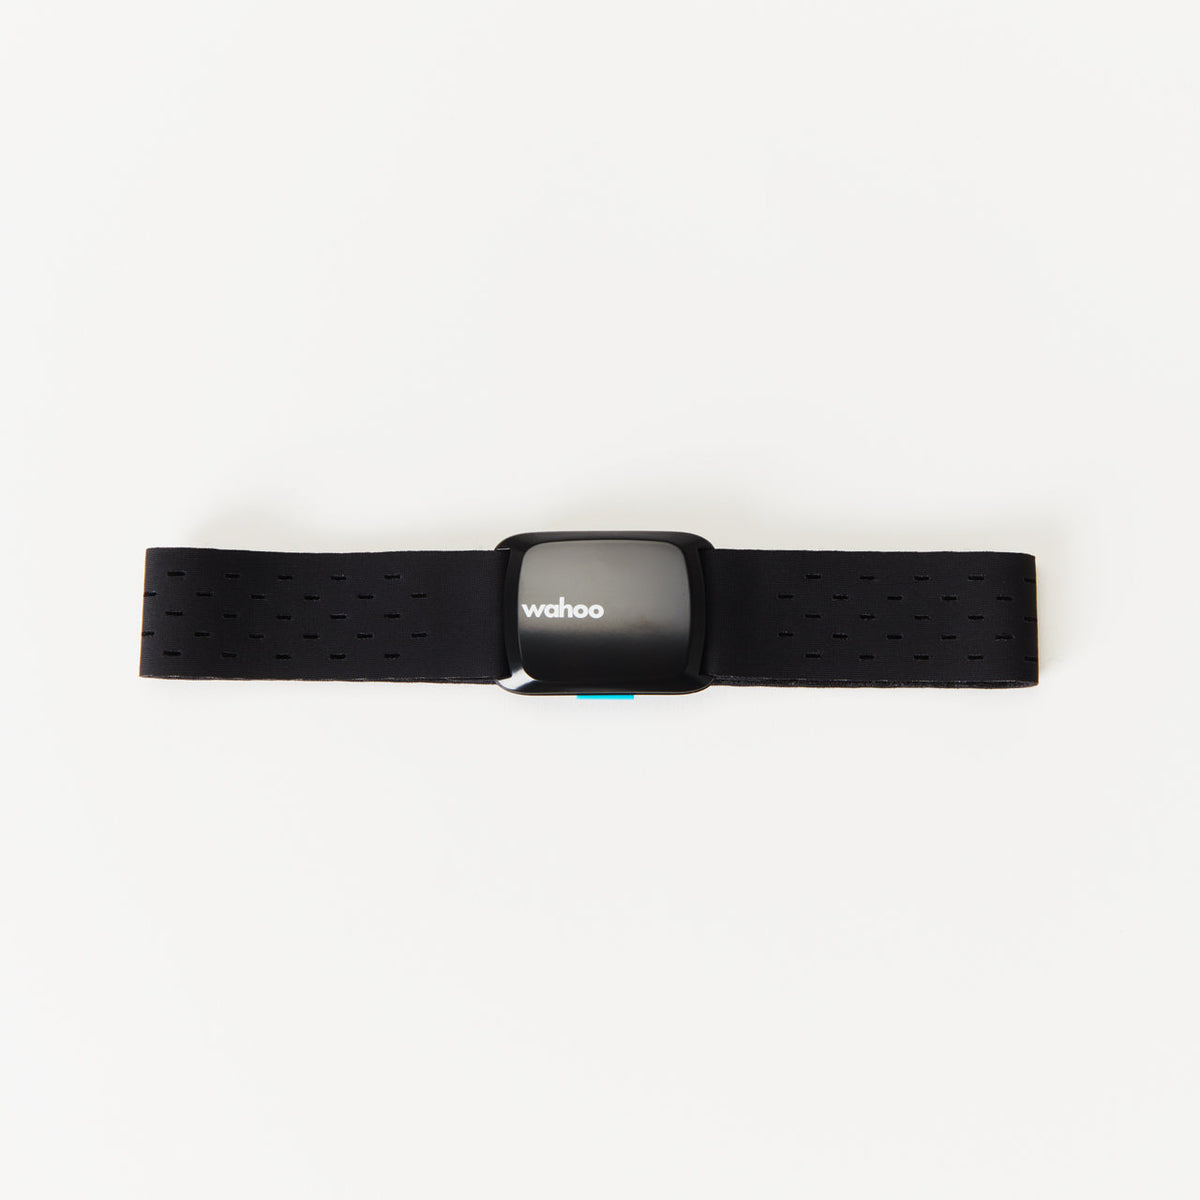 Wahoo Tickr Heart Rate Monitor Arm Band